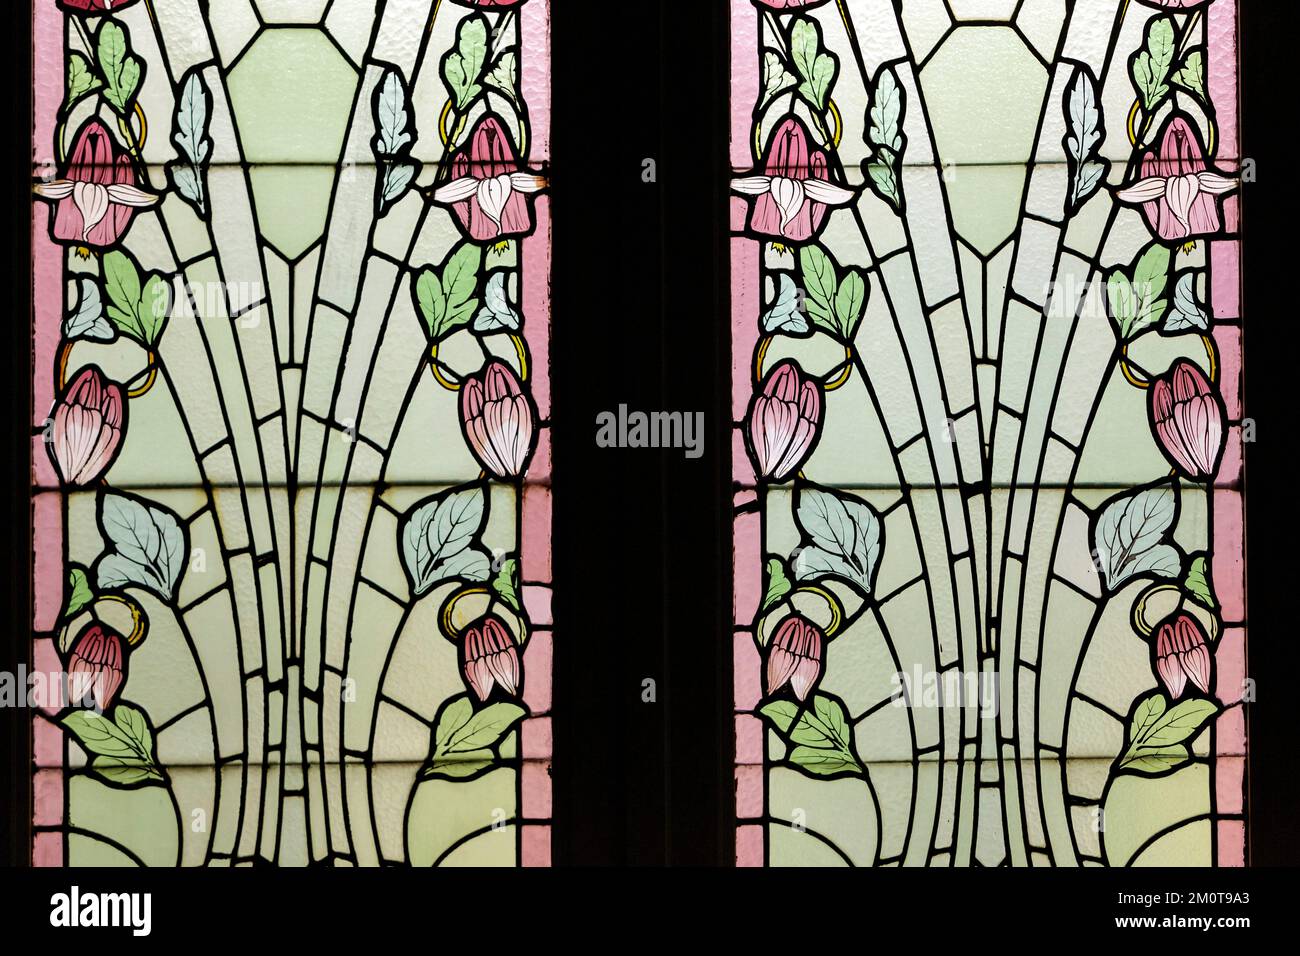 France, Meurthe et Moselle, Nancy, Musee de l'Ecole de Nancy (museum of the Nancy School) former mecene Eugene Corbin's house dedicated to Art Nouveau, stained glass window called Les ancolies (aquilegias)by Koenig et Lafitte made around 1911 Stock Photo